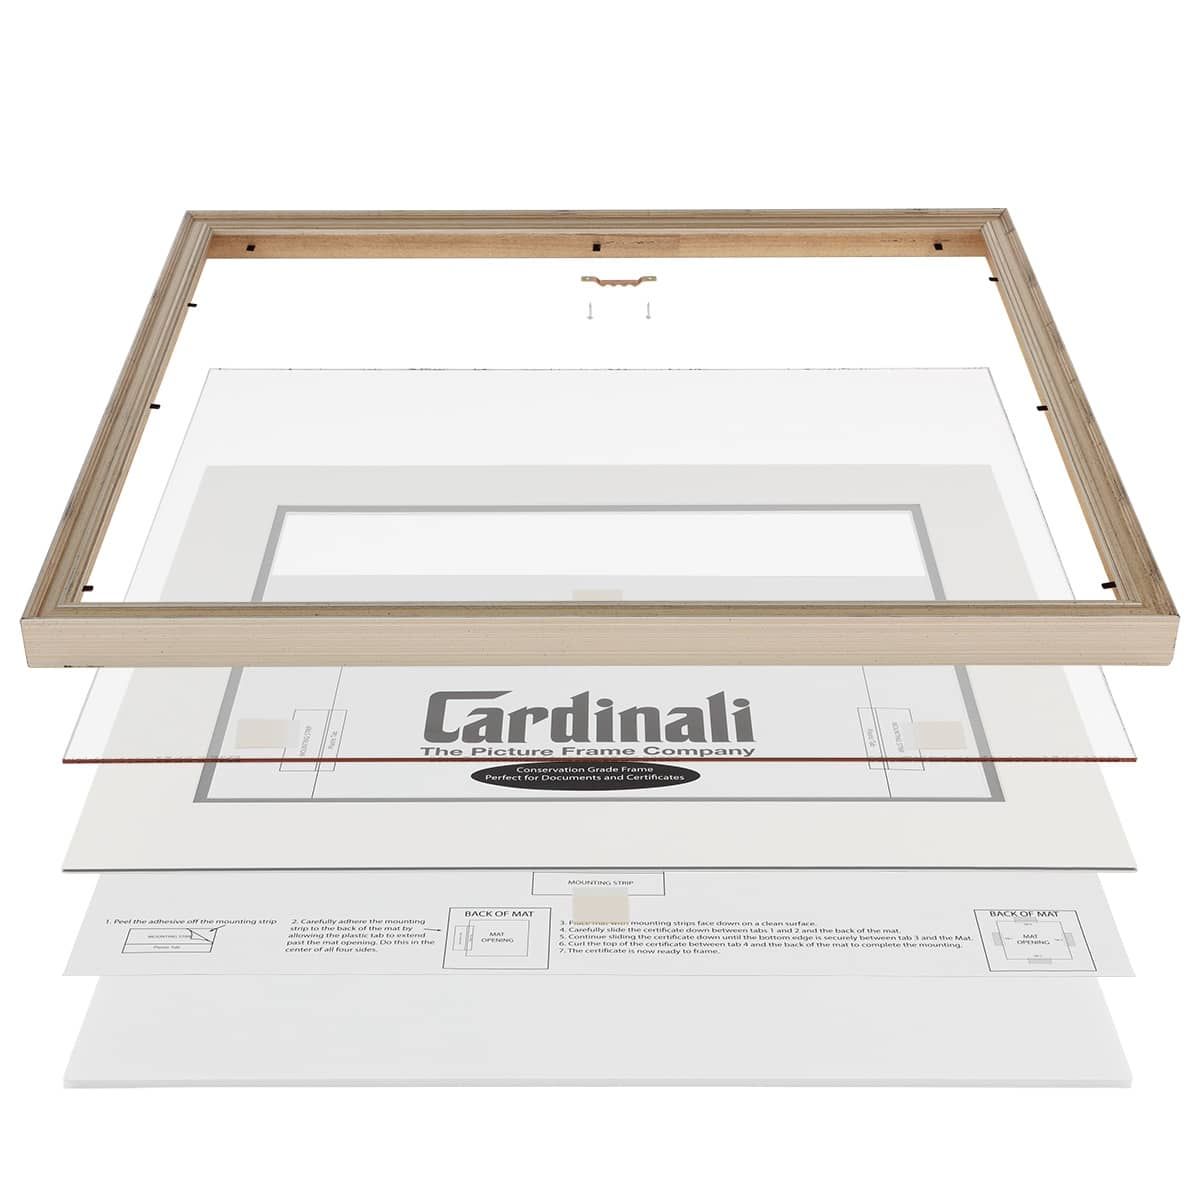 Complete Archival Framing Solution - Directions & Hardwarde Included